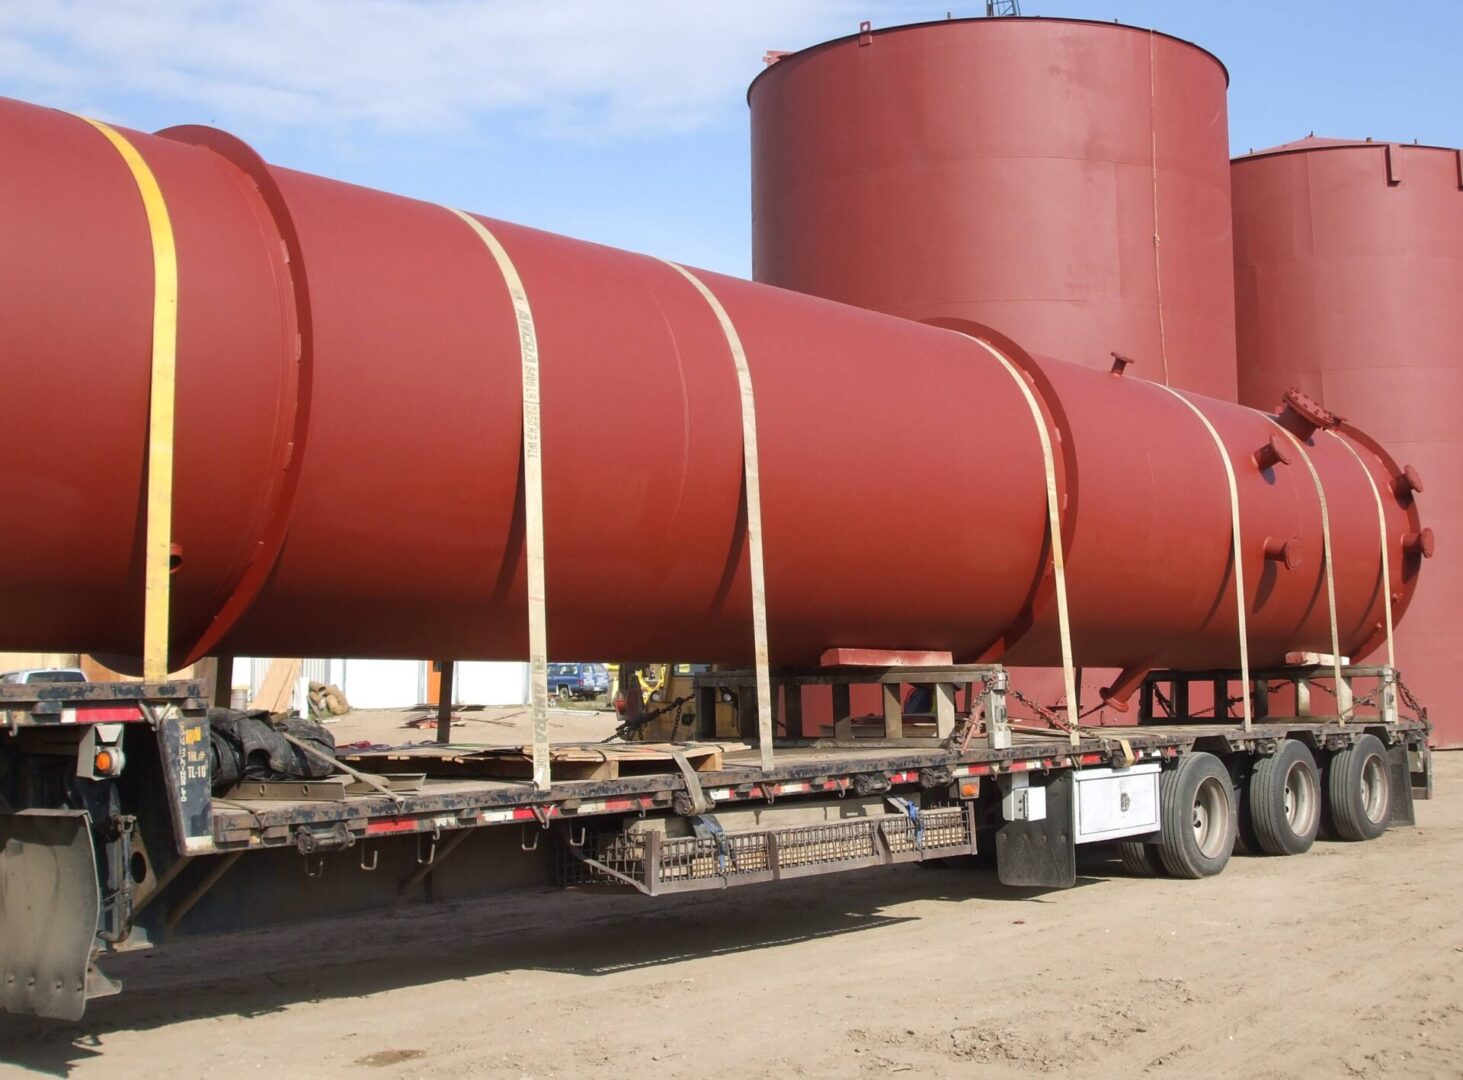 A large red tank on the back of a truck.